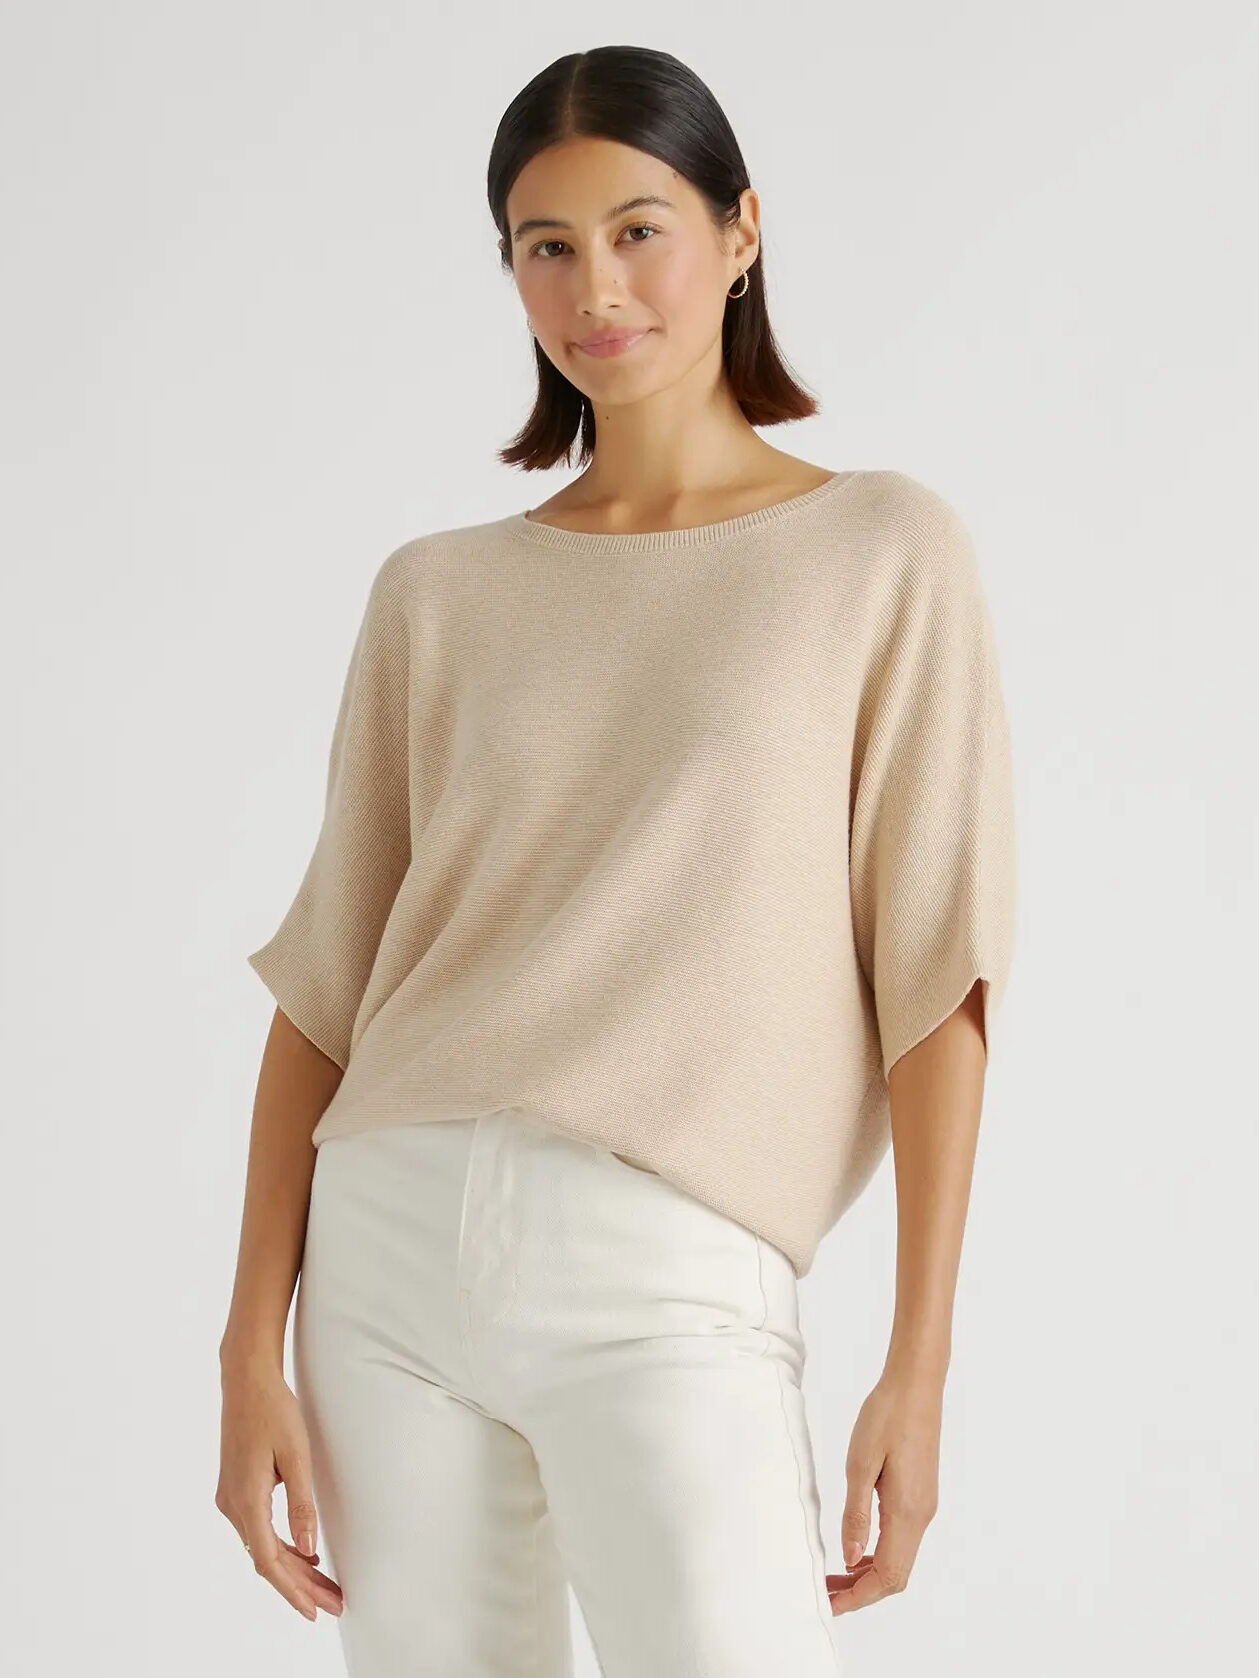 The model is wearing a beige sweater and white pants.